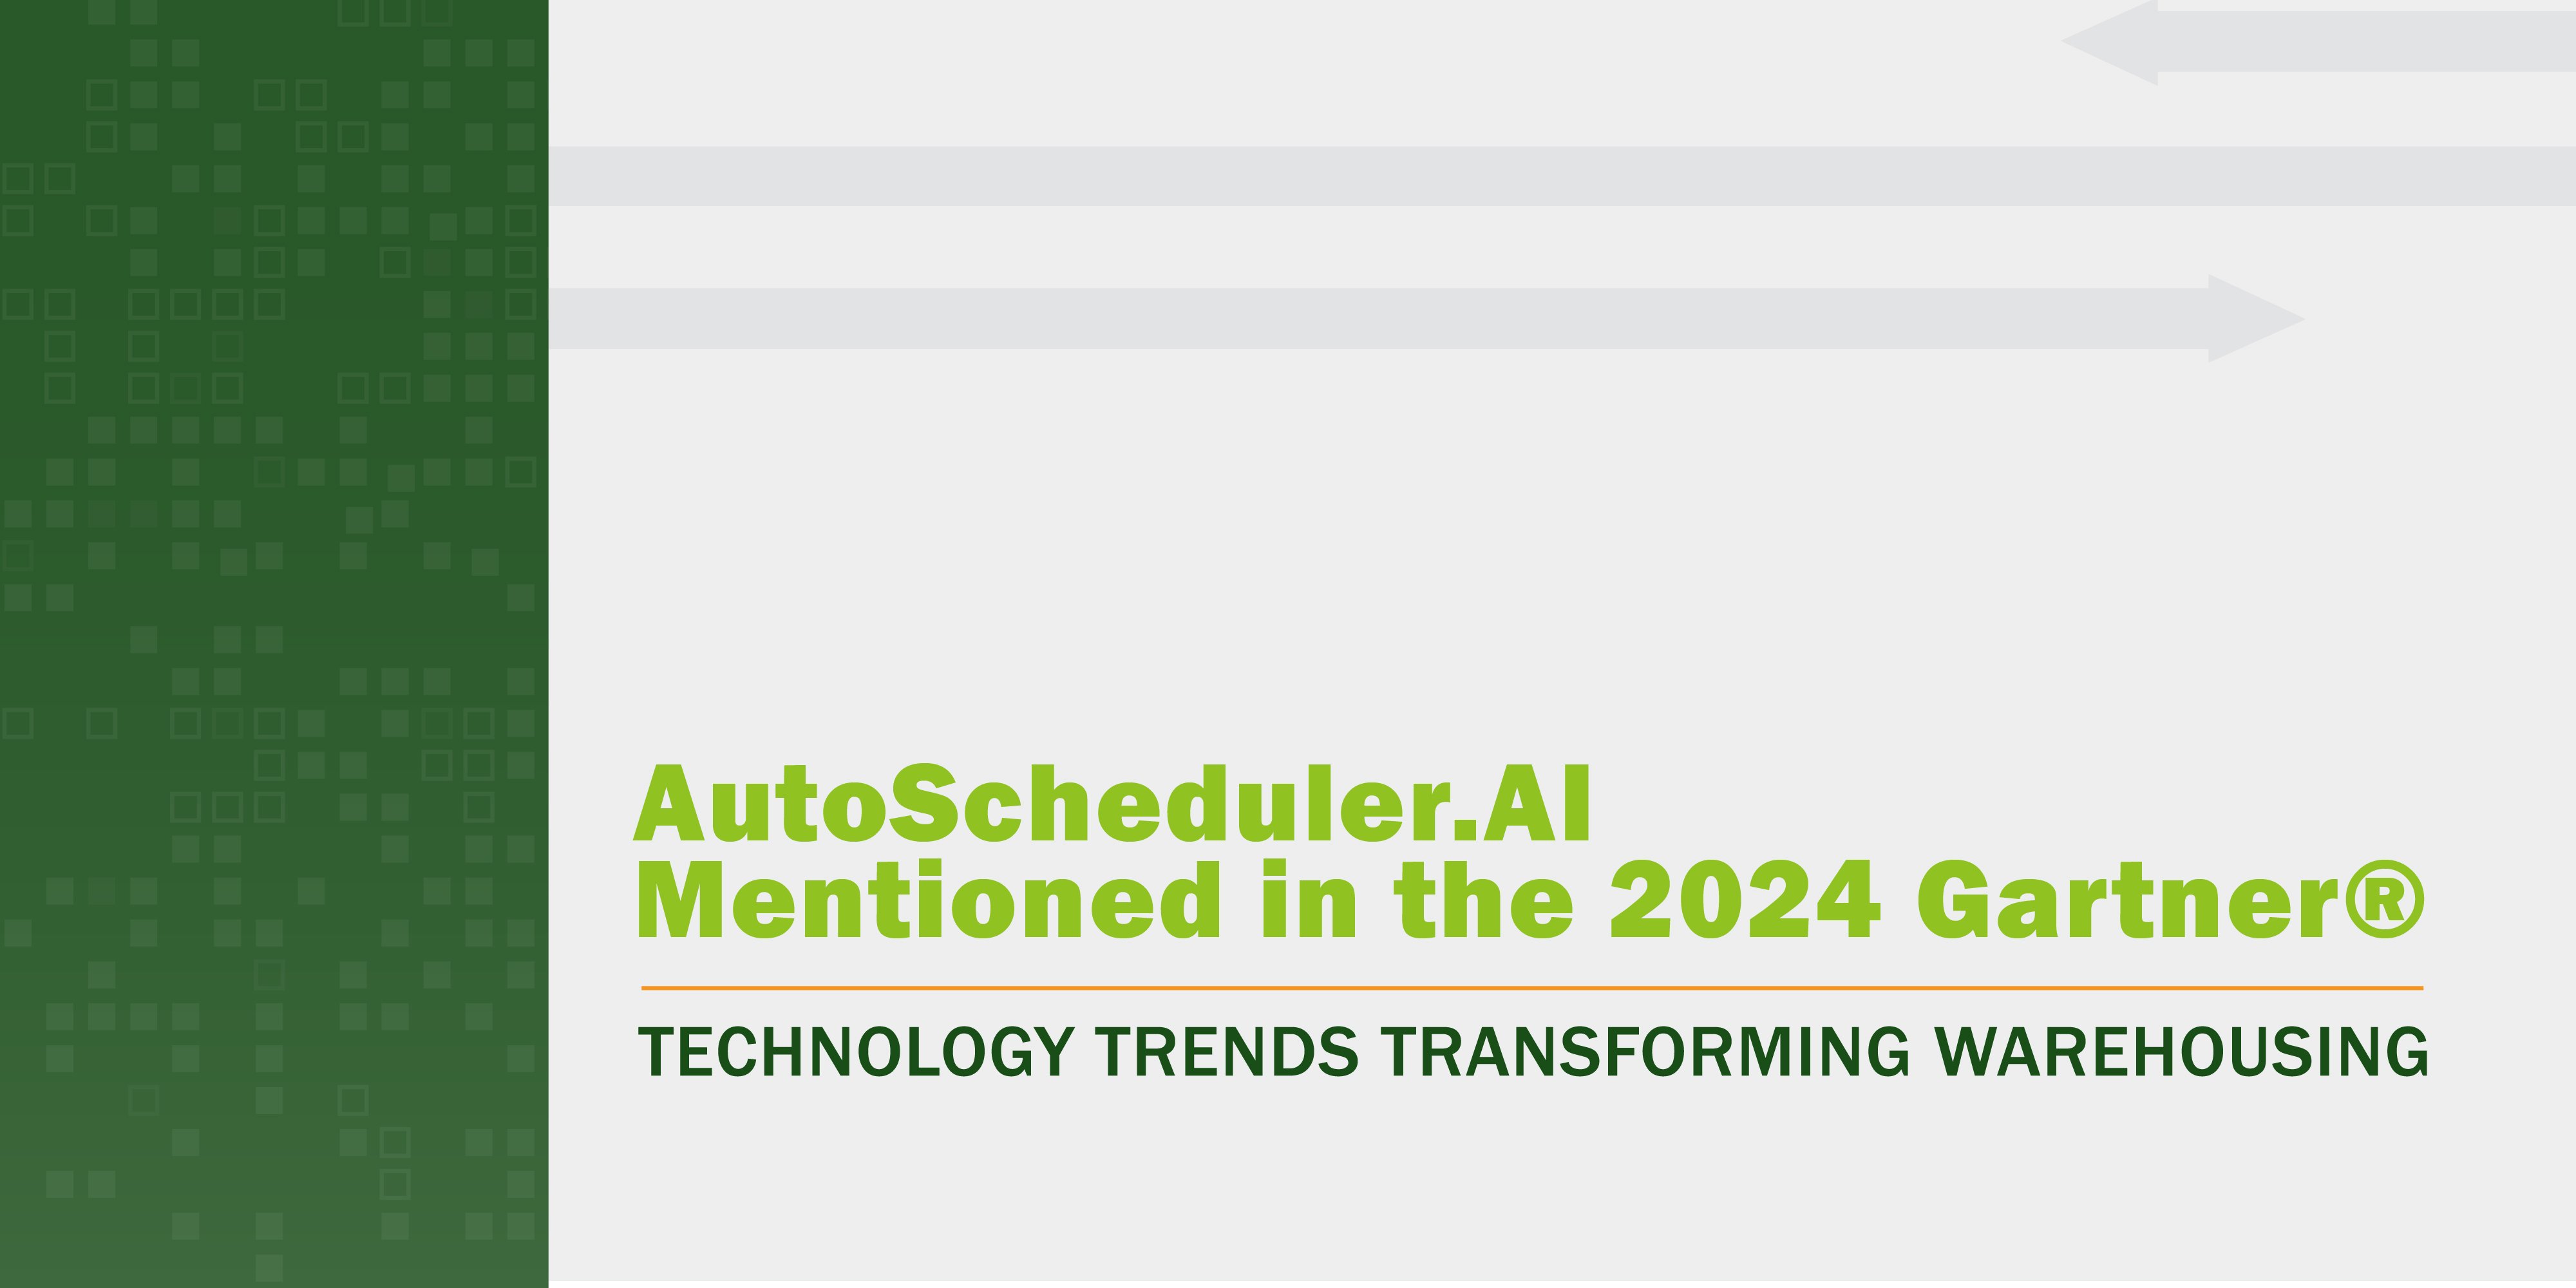 AutoScheduler.AI Mentioned in the 2024 Gartner® Technology Trends Transforming Warehousing — Part 2: Handling Volatility & Complexity Report